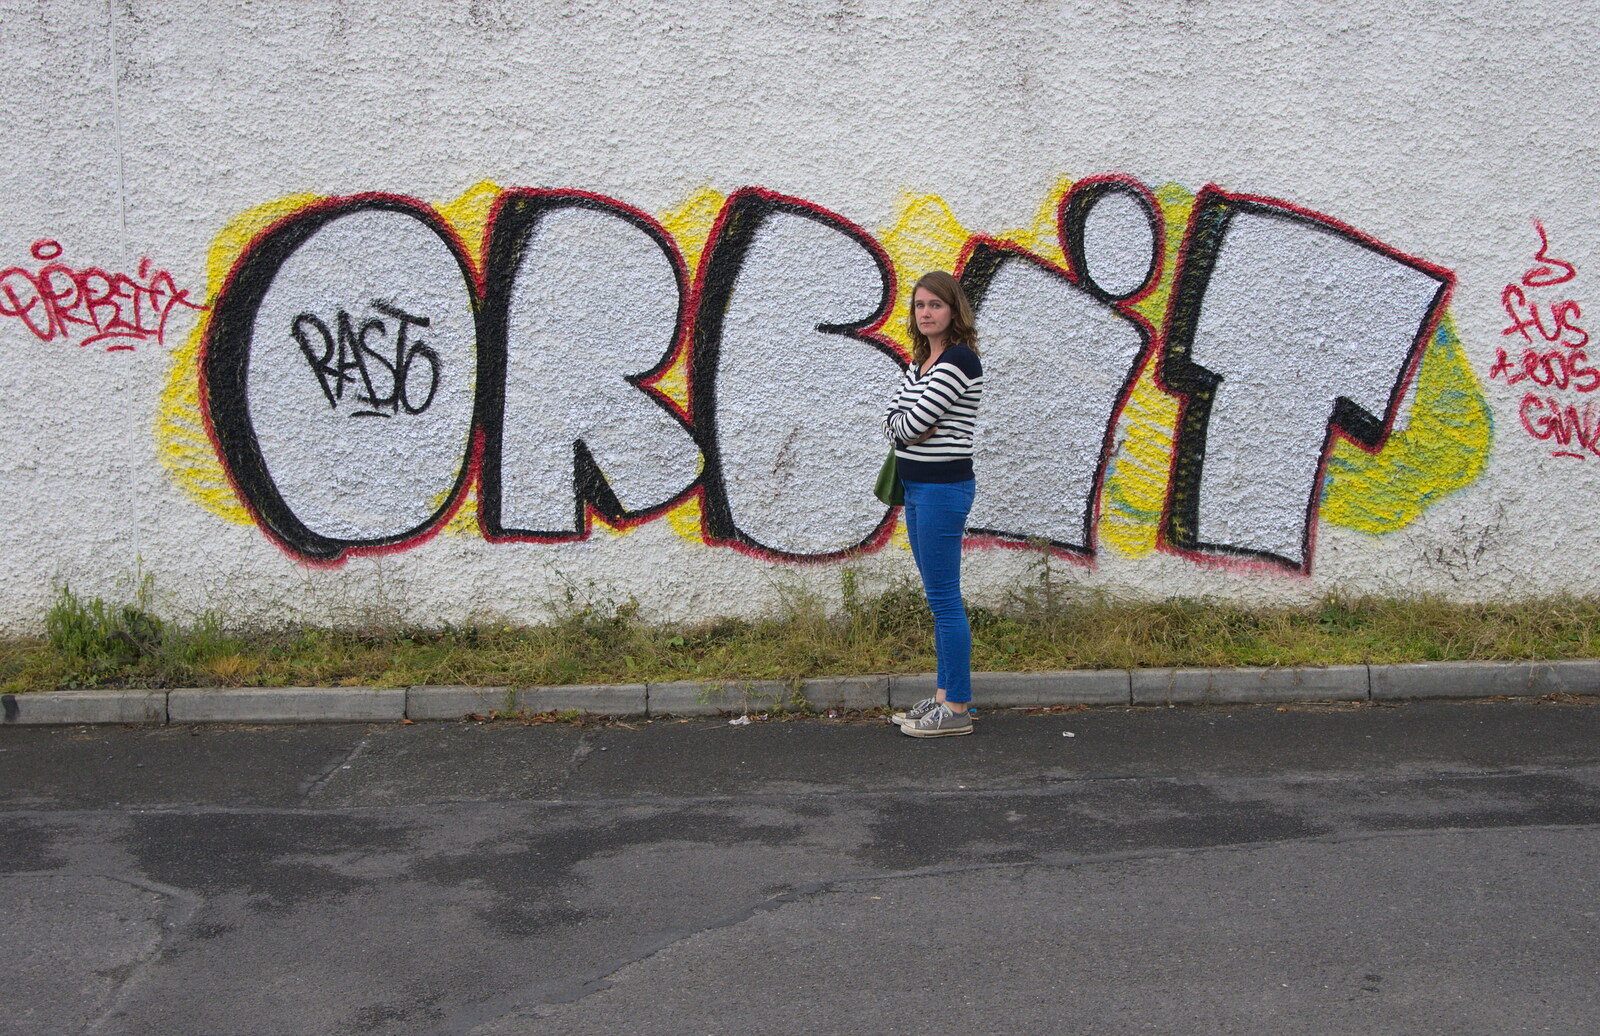 Isobel stands by some Orbit graffiti from A Night Out in Dublin, County Dublin, Ireland - 9th August 2014